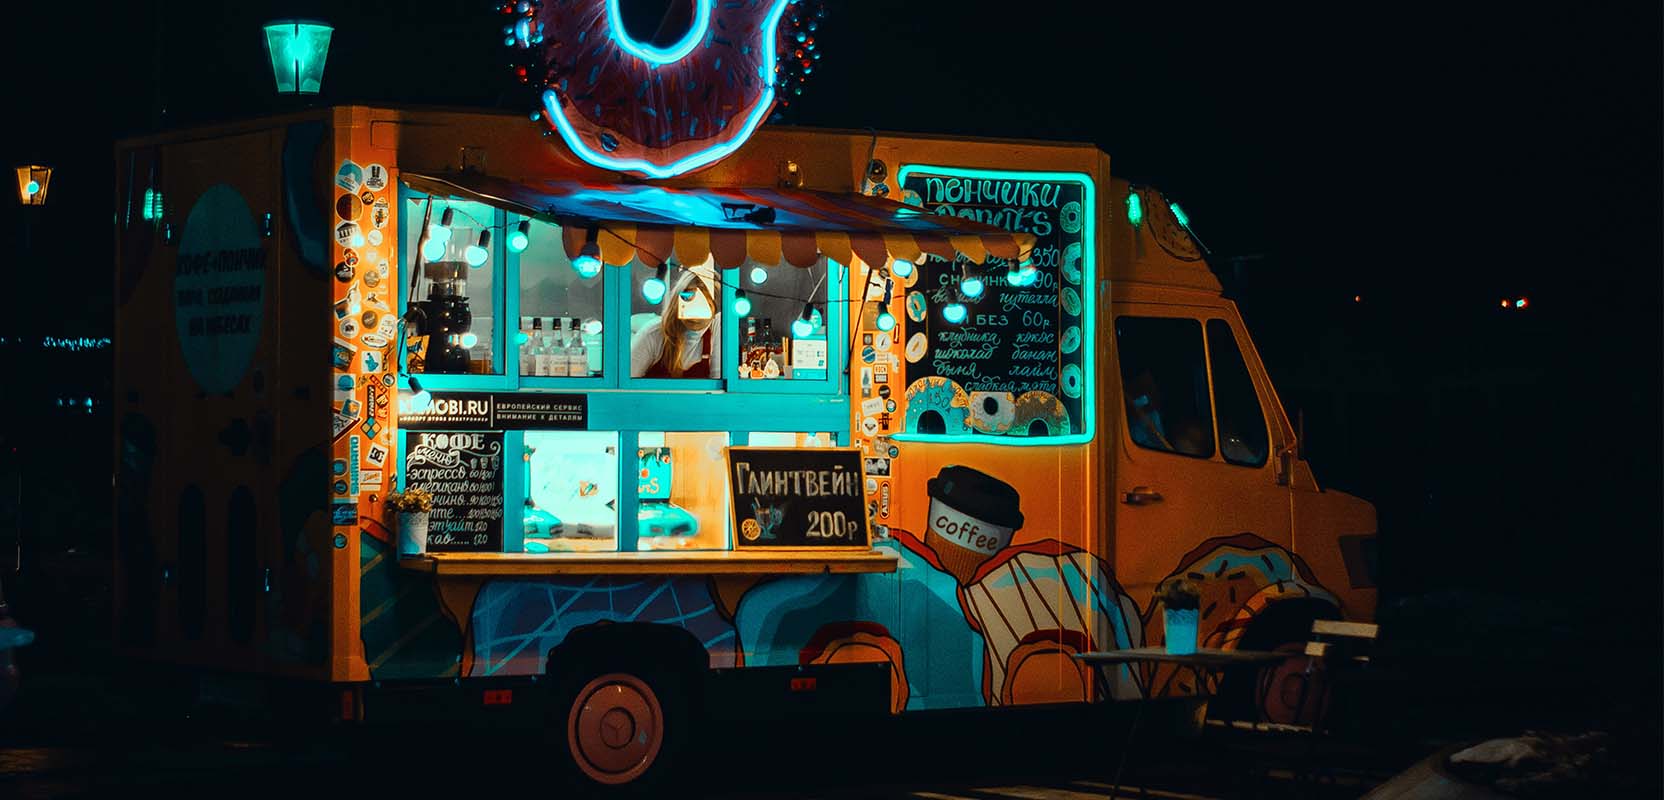 A food truck selling food on the side of the street.